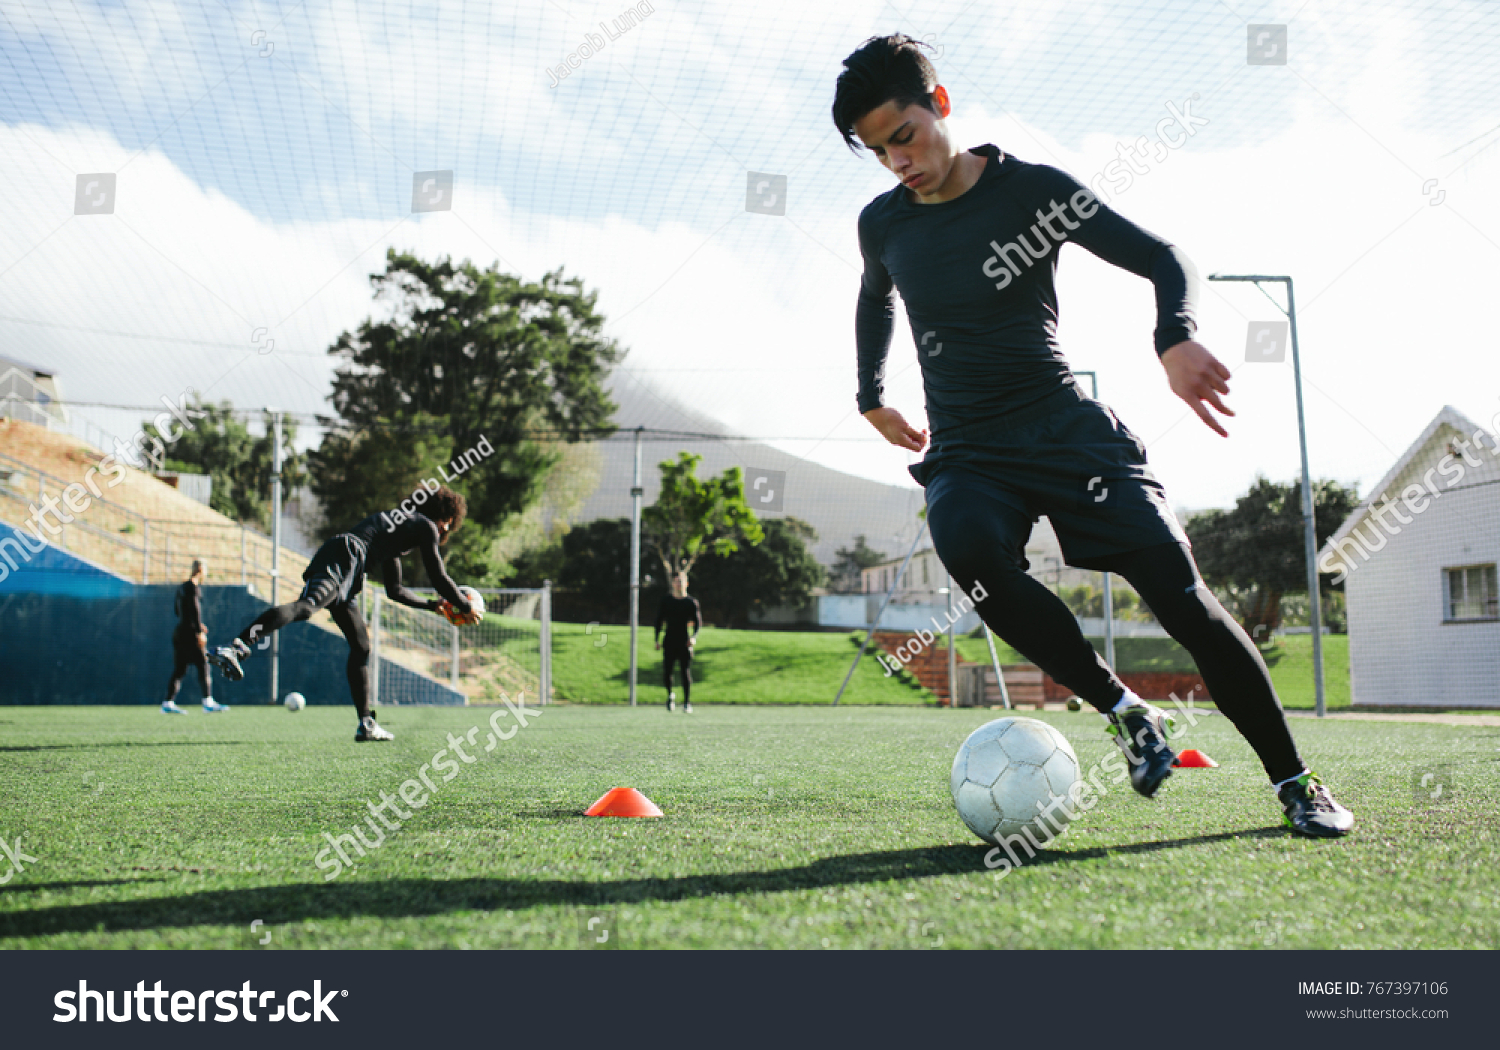 Football player training in soccer field. Young soccer player practicing ball control on training session. #767397106